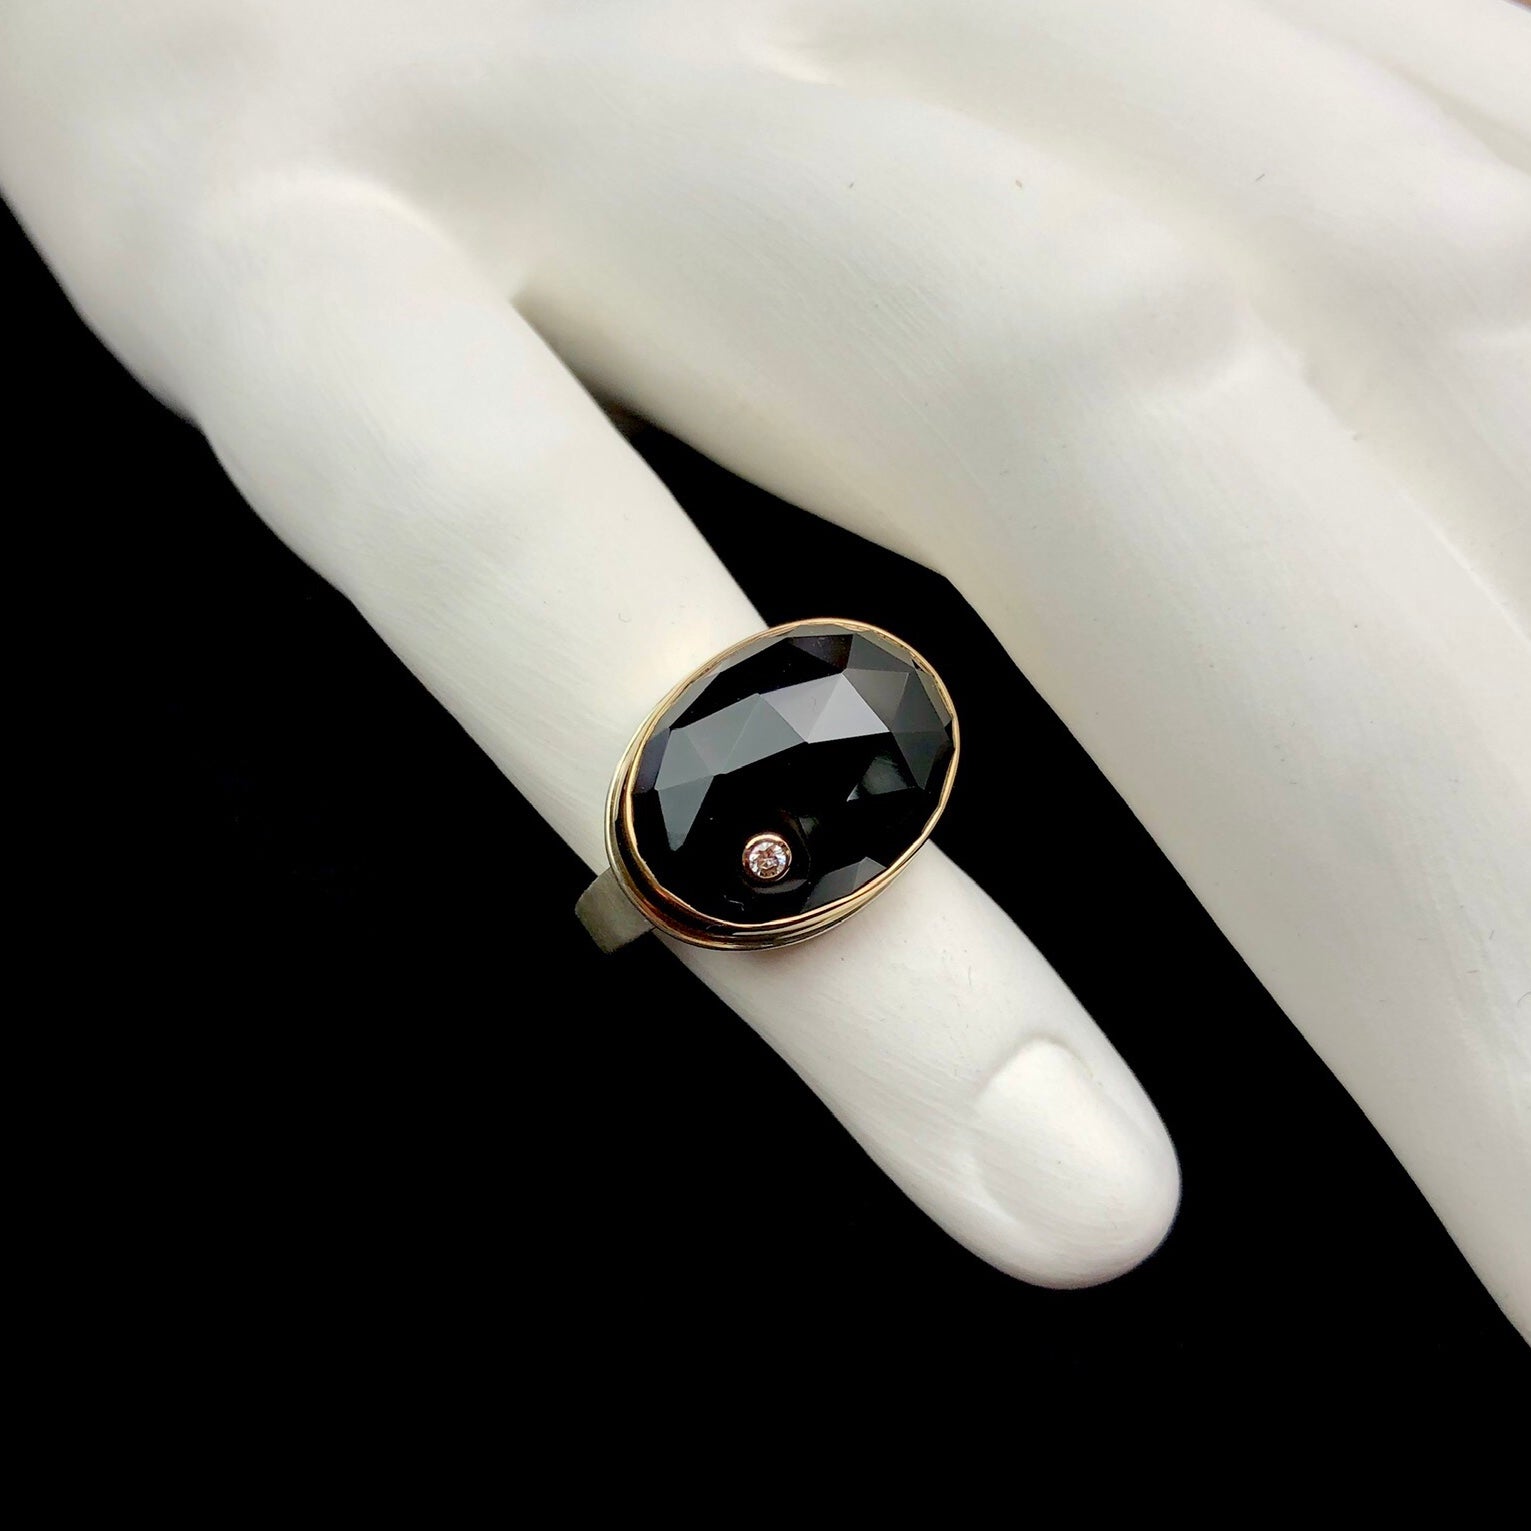 Top view of oval shaped black onyx ring with diamond accent